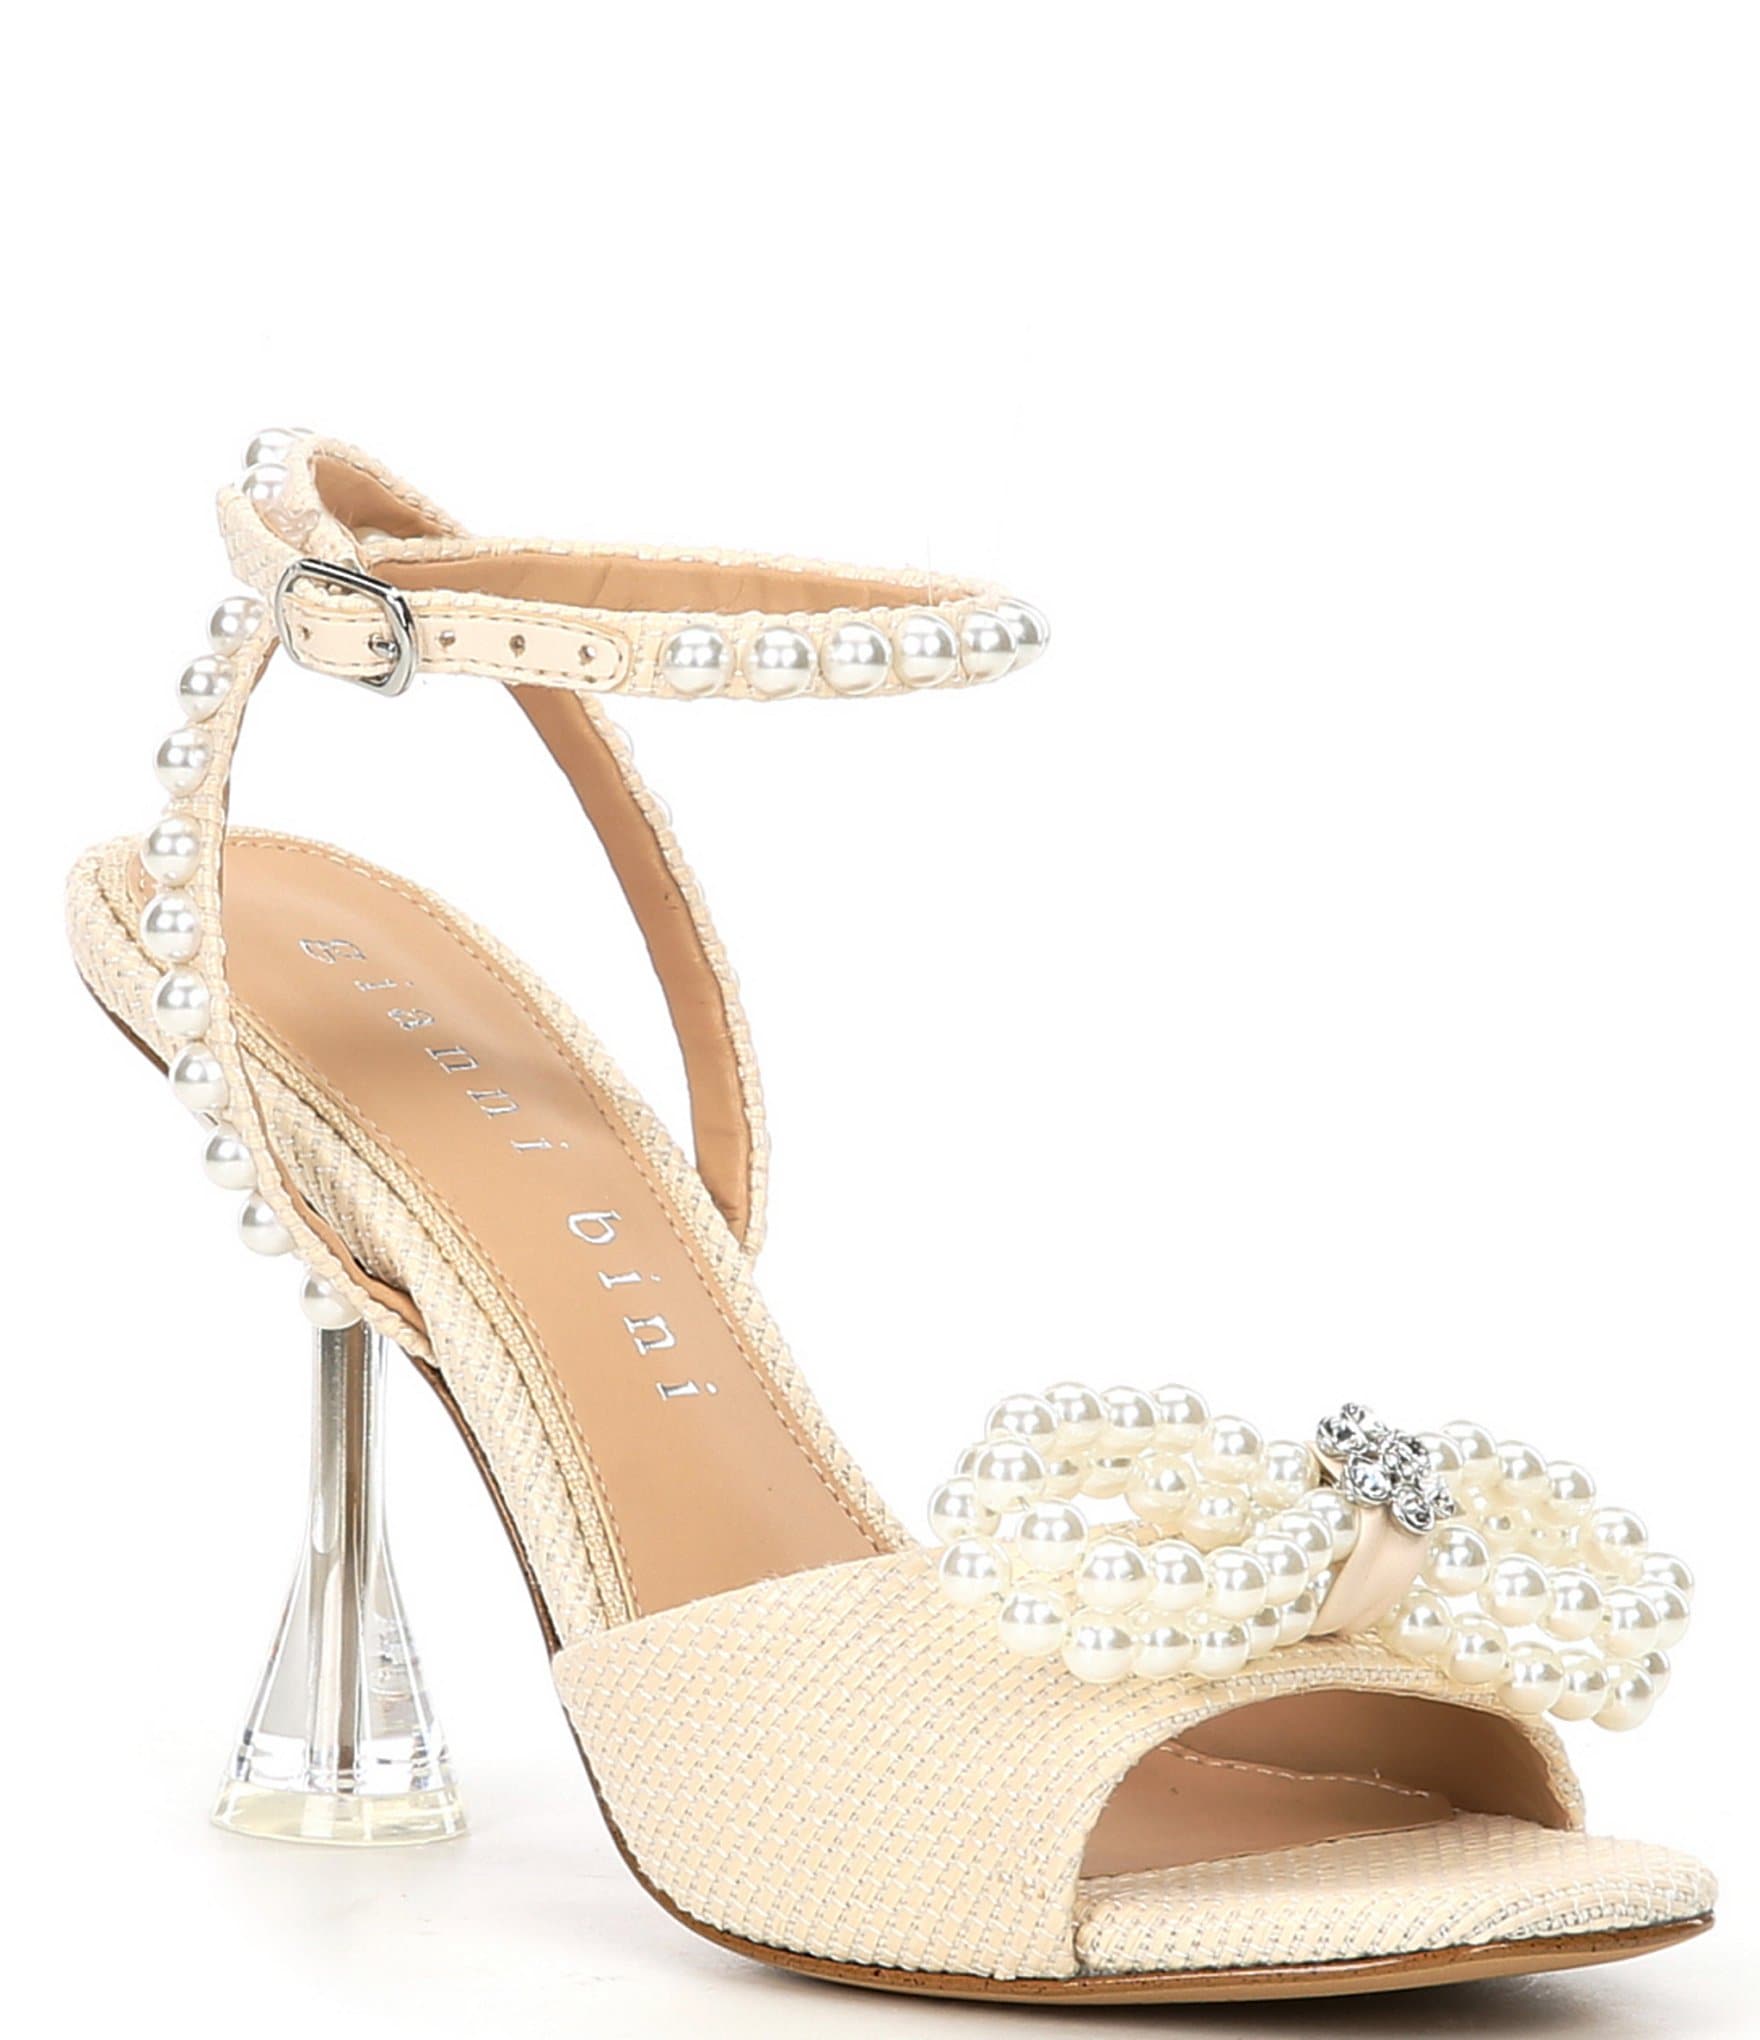 Gianni Bini HaydnTwo Raffia Pearl Bling Bow Ankle Strap Dress Sandals ...